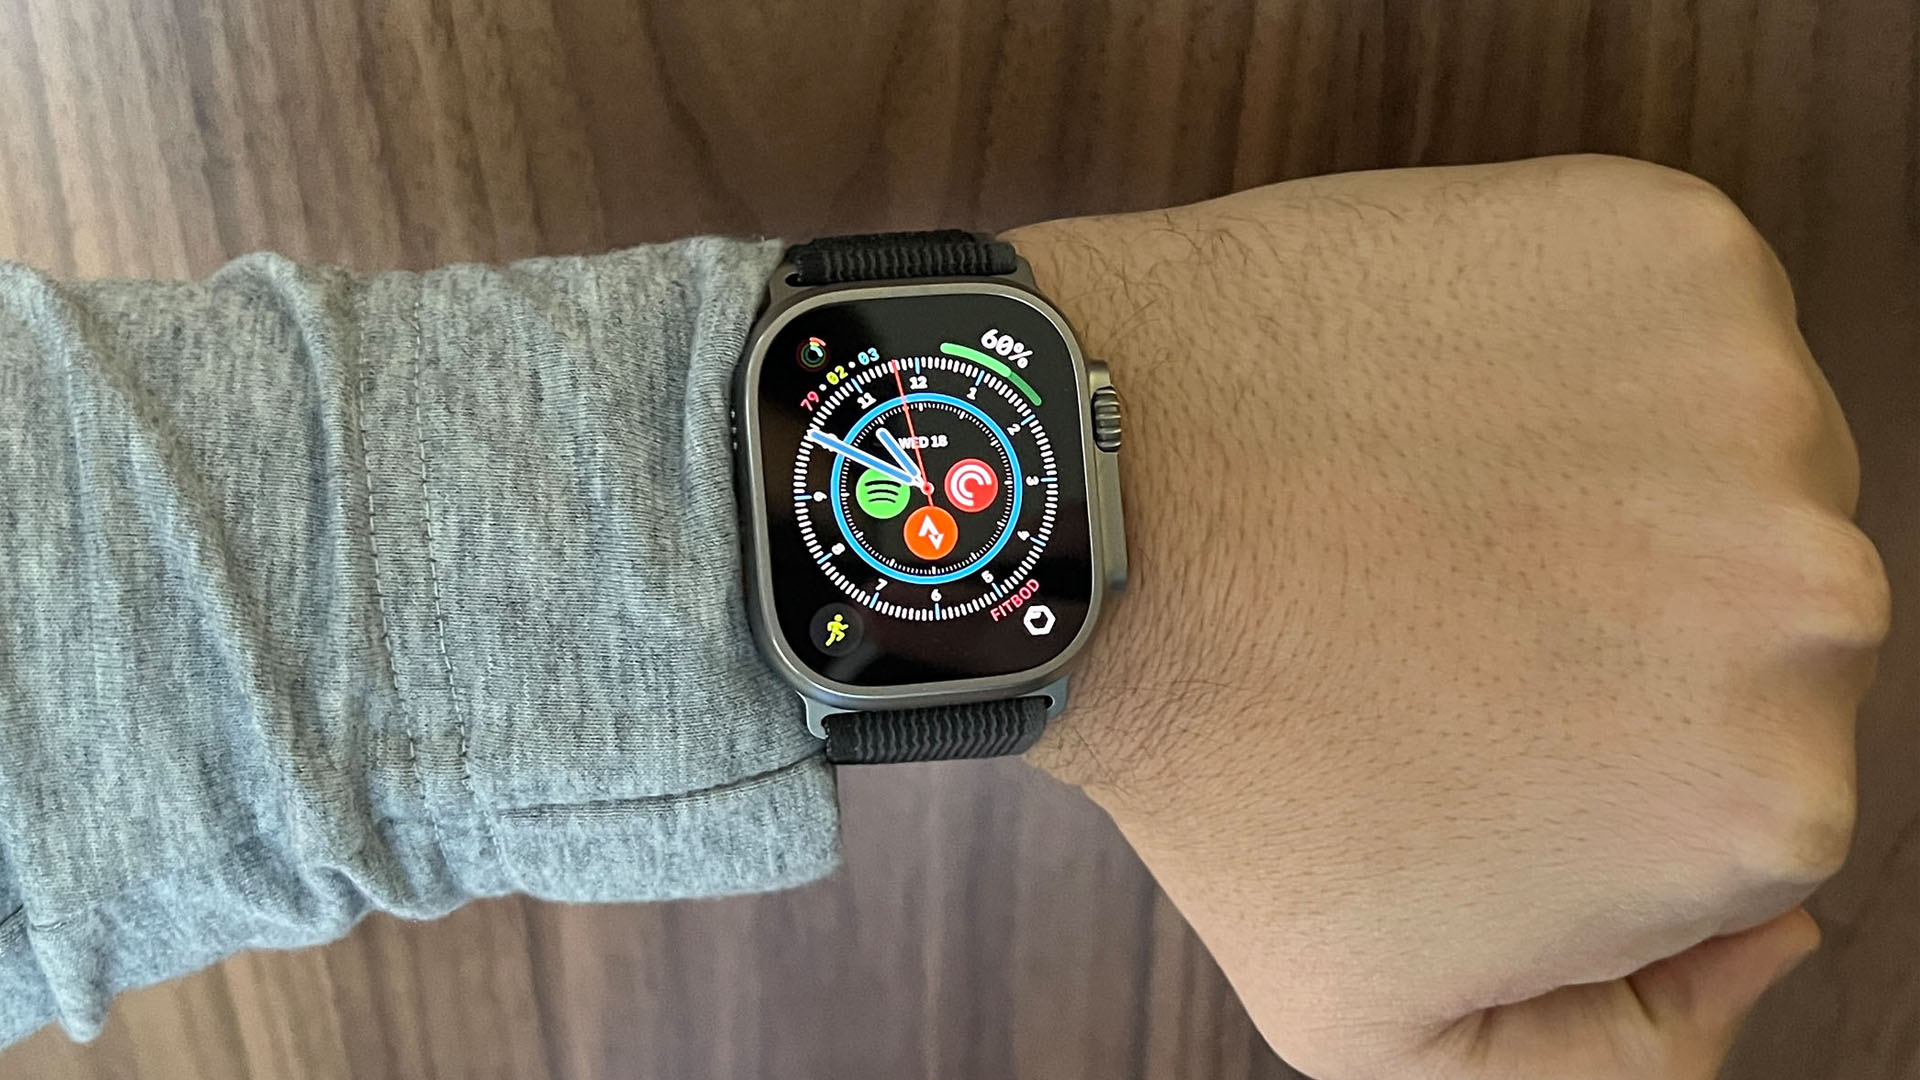 Apple Watch Ultra Hands-On: A Huge, Pricey Smartwatch With a New Look - CNET